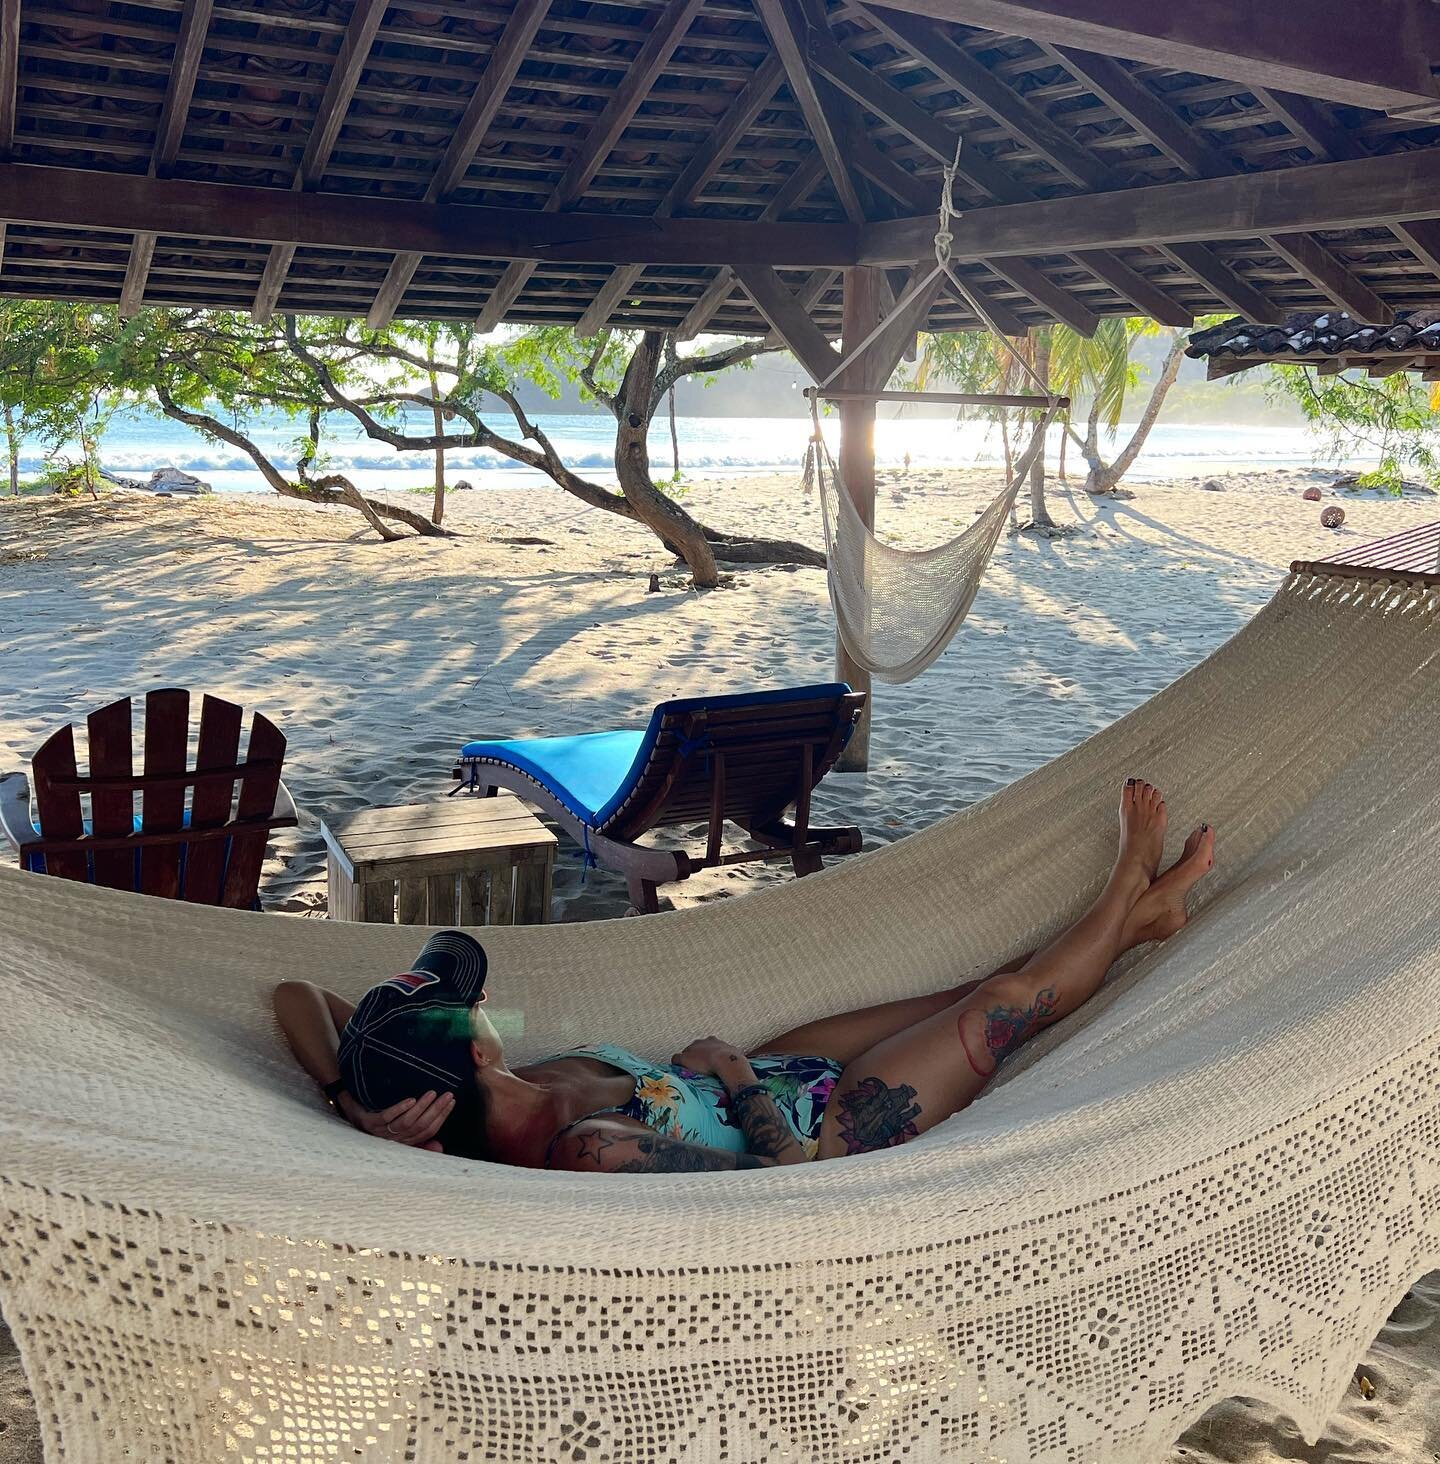 There&rsquo;s been a lot of beach lounging going on over here at Morgan&rsquo;s Rock - follow along on our stories! #morgansrock #sanjuandelsur #familytravel